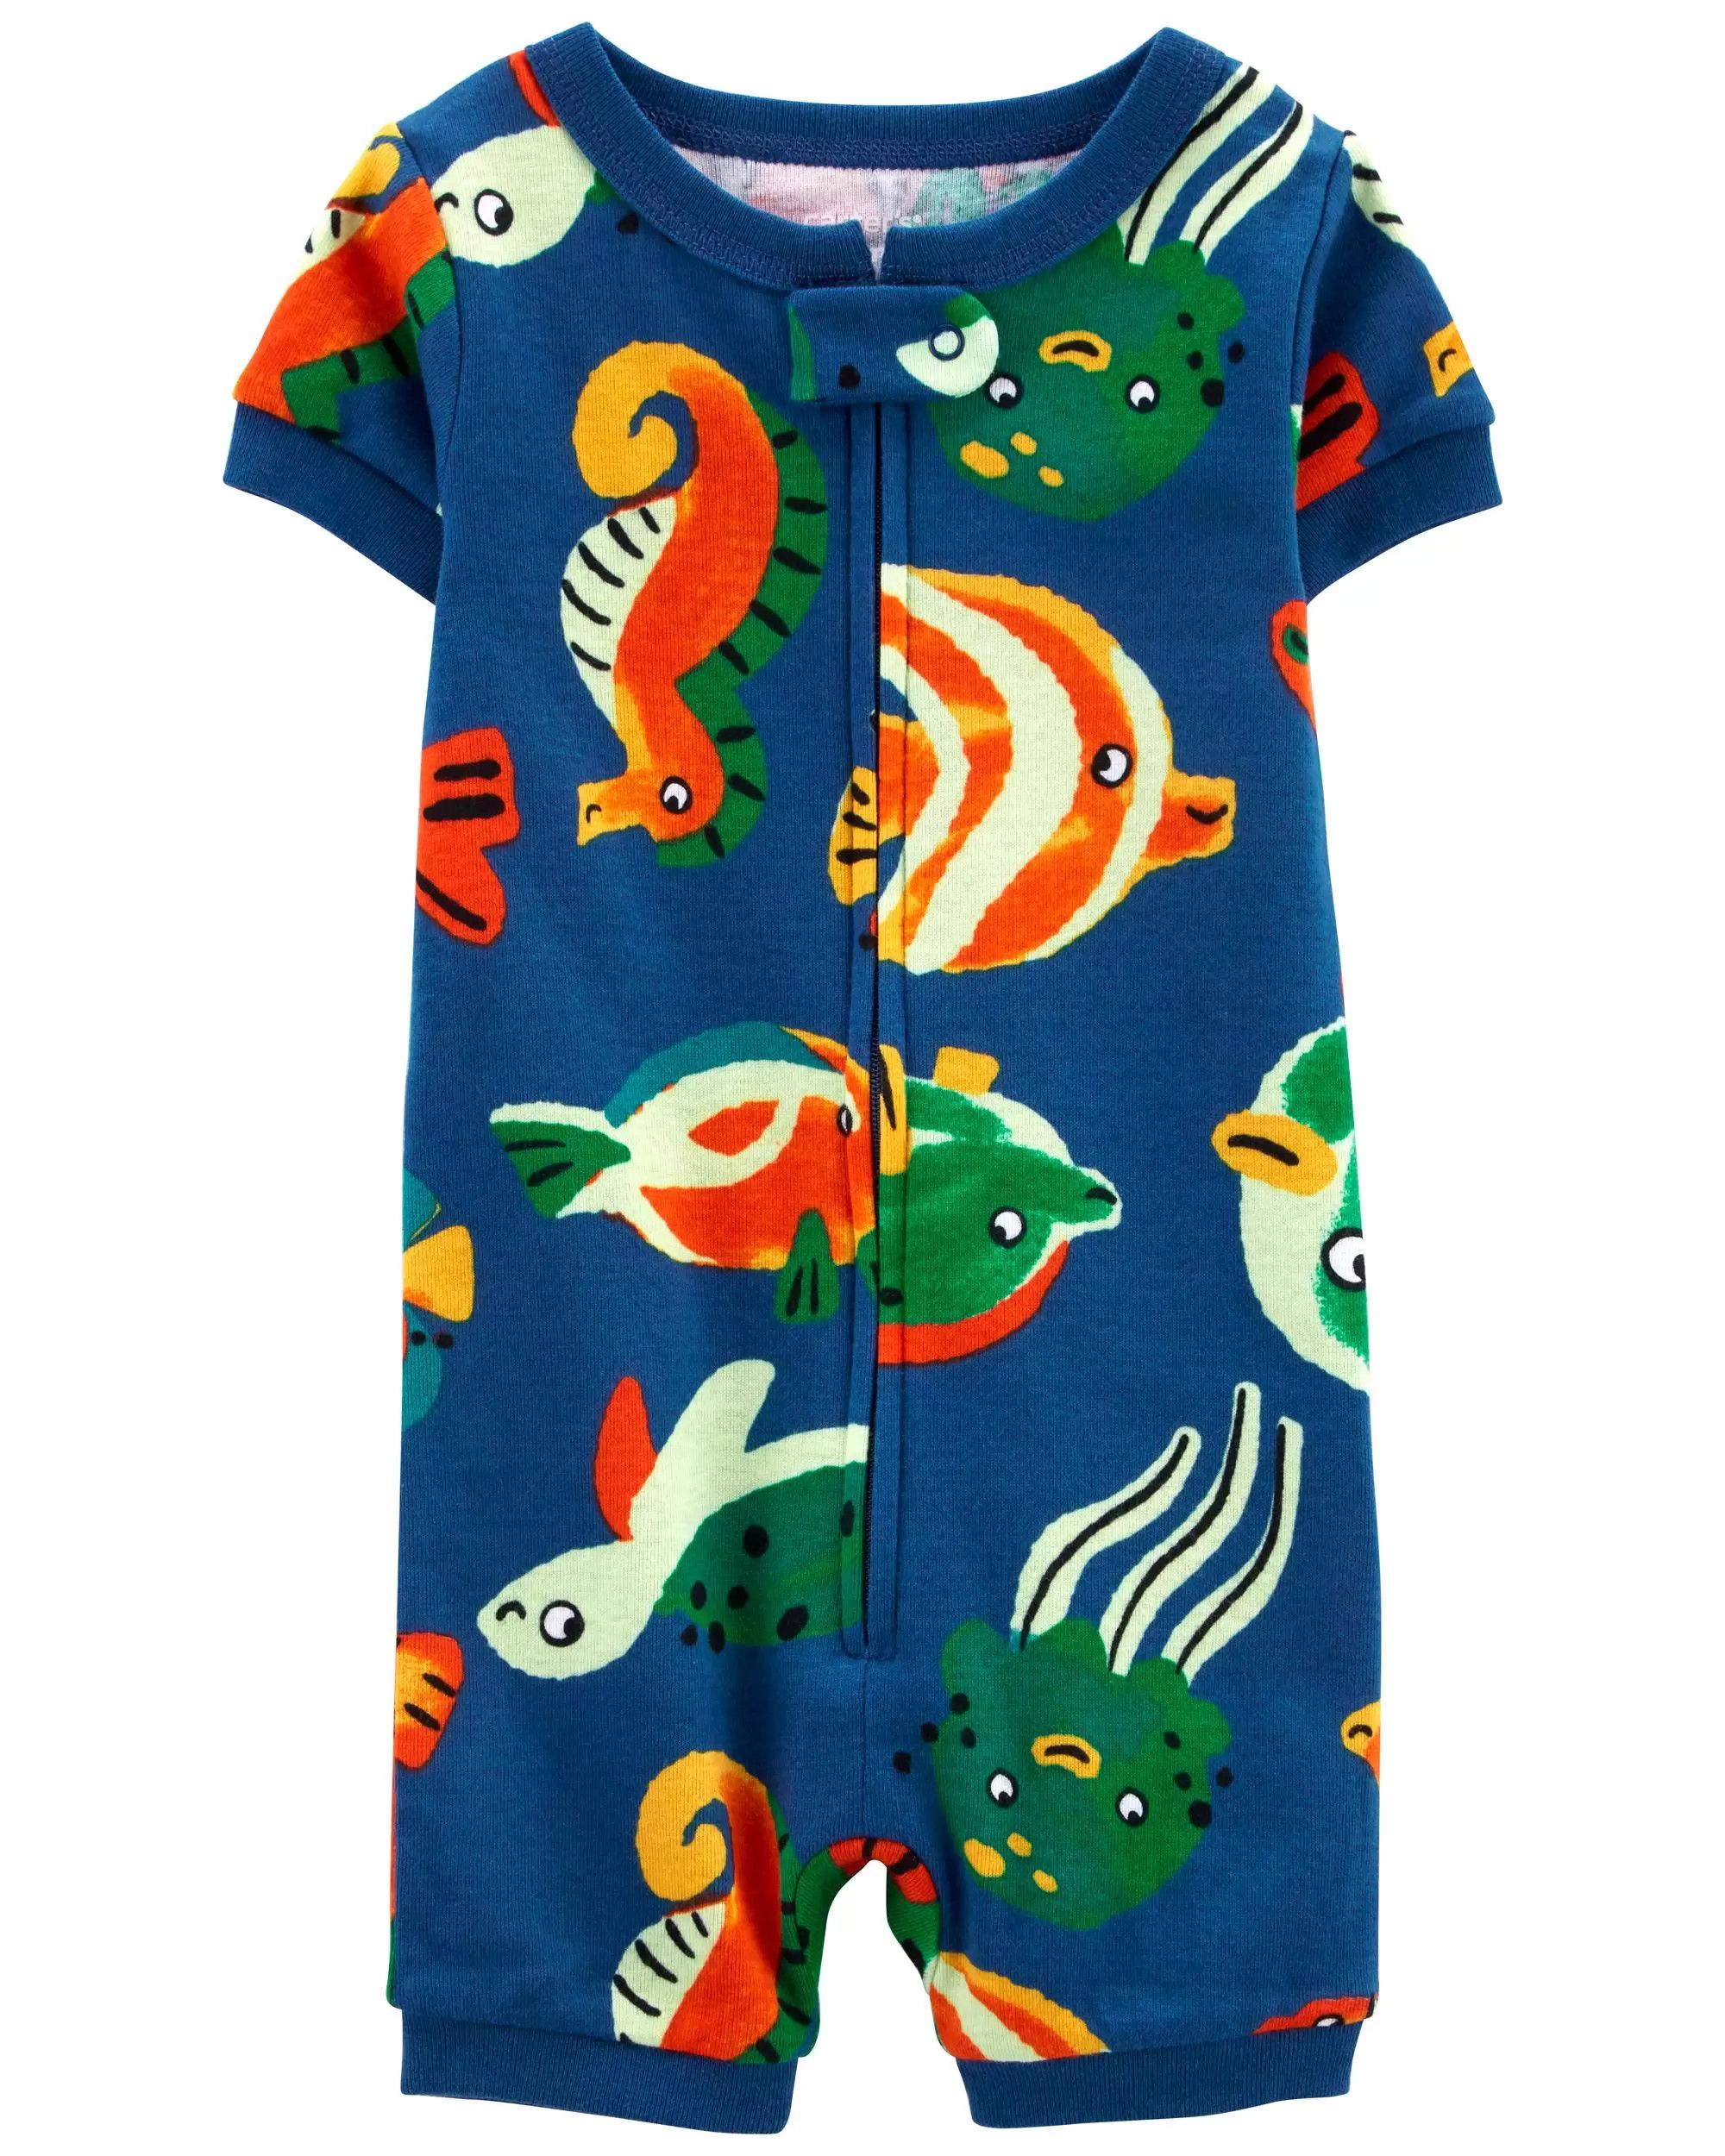 Baby 1-Piece Sea Creatures Cotton Romper  | Baby Boy Clothes, Baby Boy Outfits | Carter's